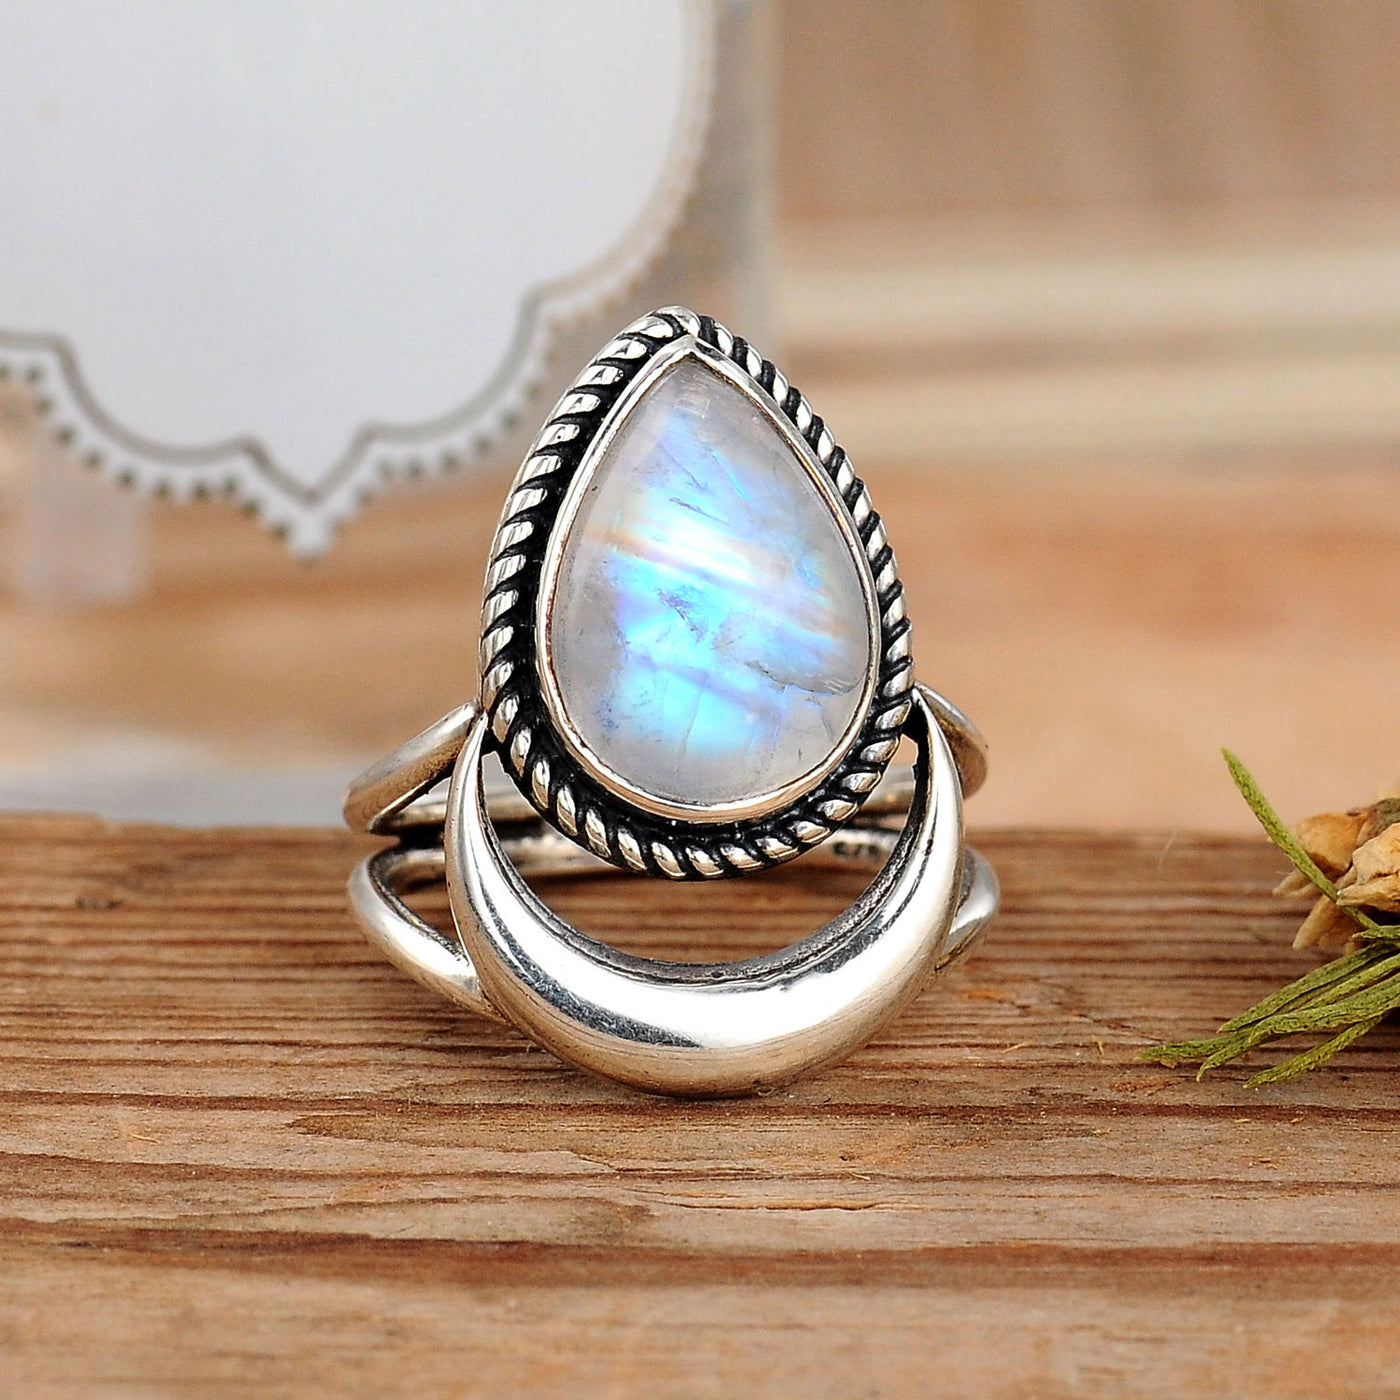 Zhiwen Boho Female Big Moonstone Ring Unique Style Silver Gold Color  Wedding Jewelry Wedding Anniversary Ring Gift Size 6-10 (Size 8) :  Amazon.in: Jewellery